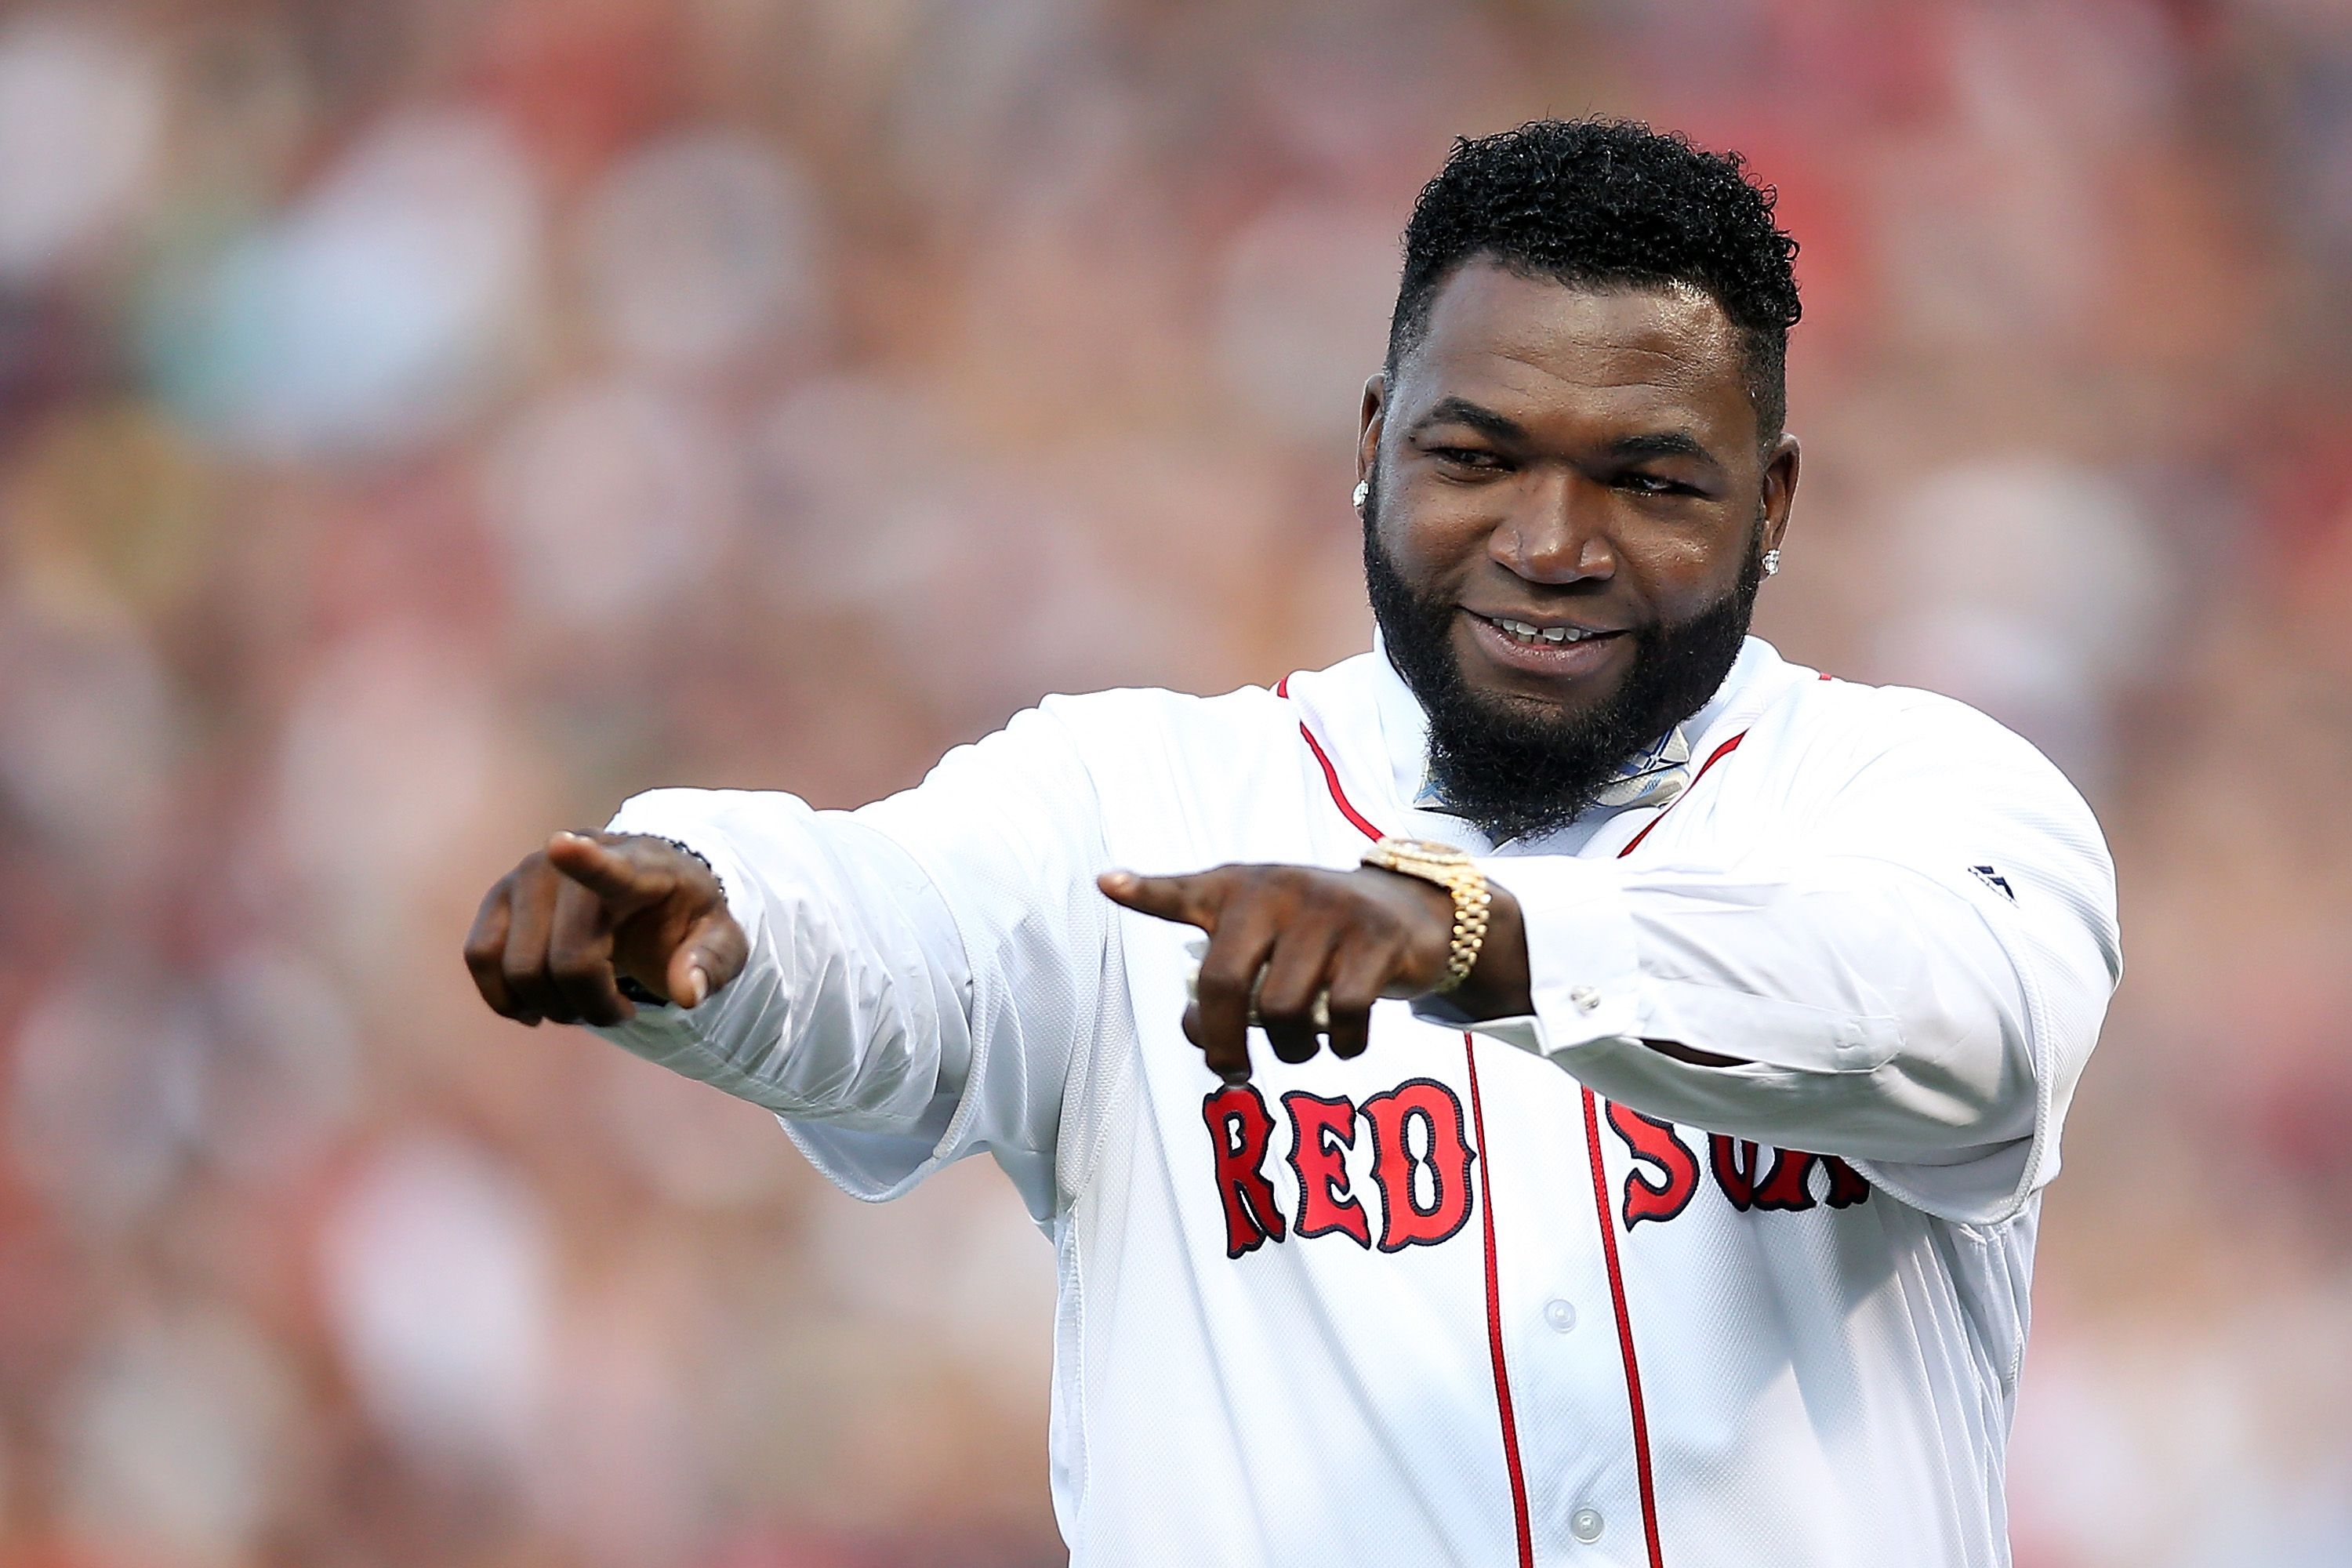 Former Red Sox Star David Ortiz 'Out of Danger' After Being Shot